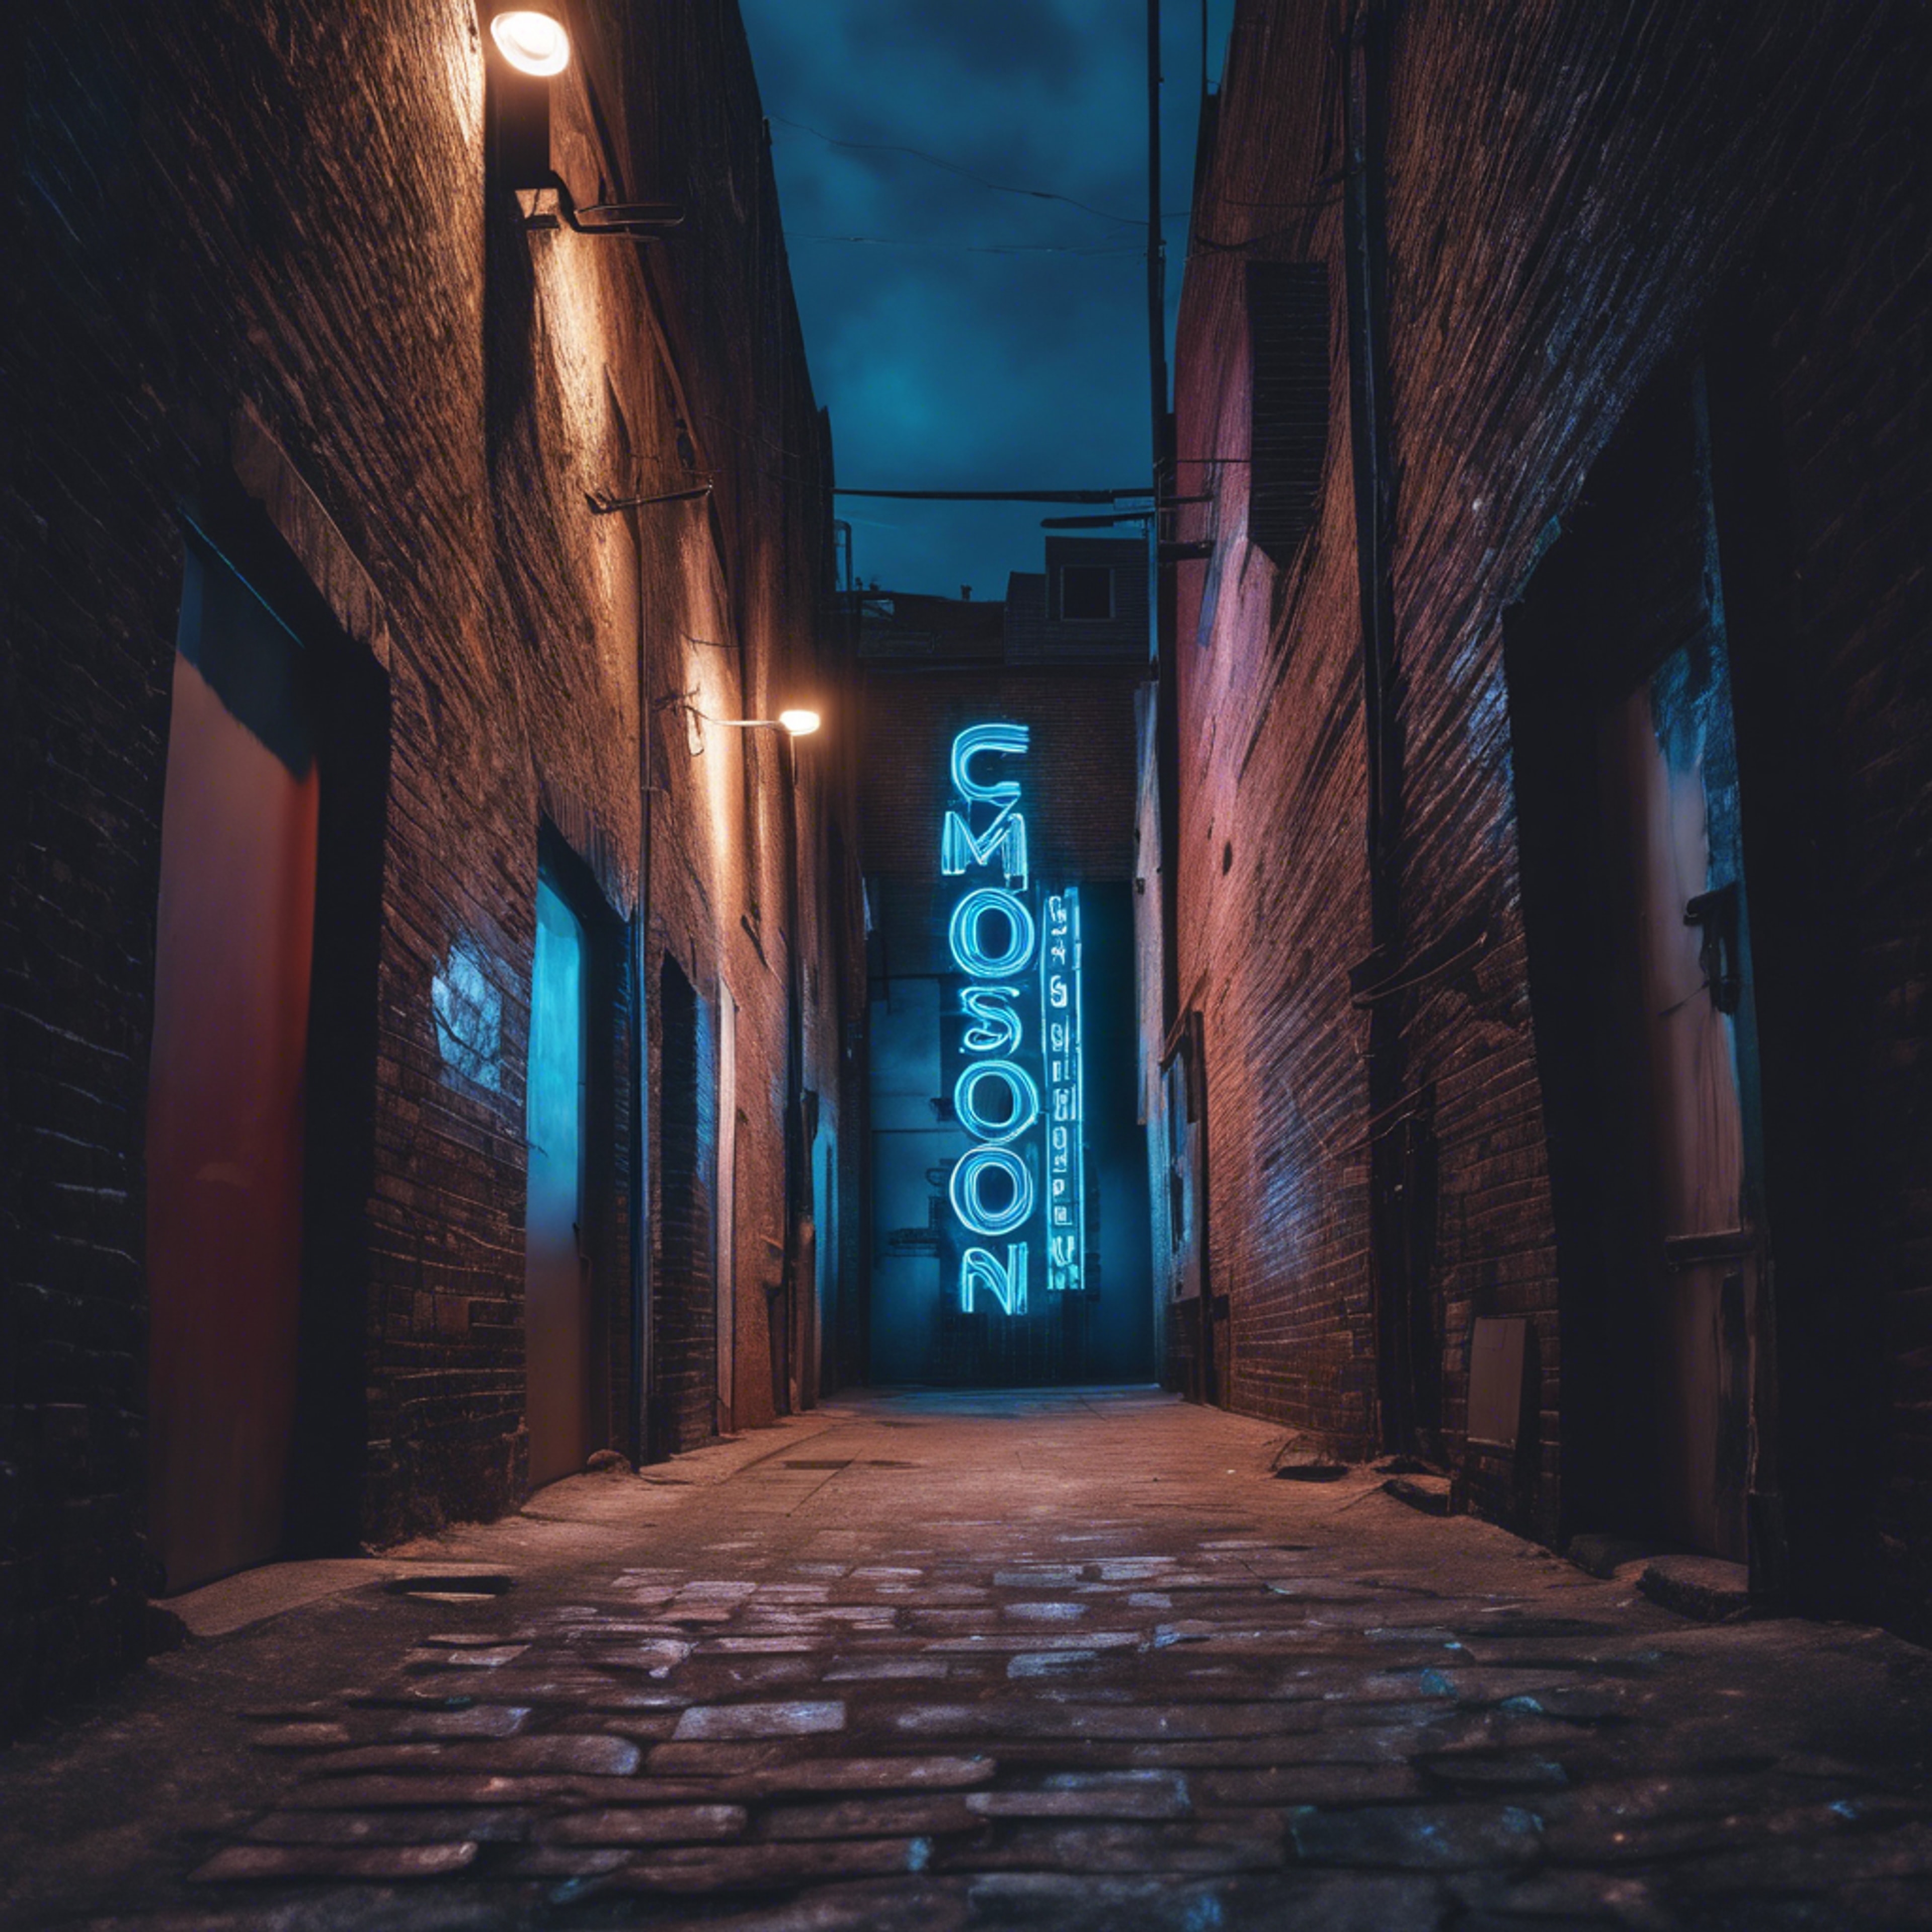 A cool blue neon sign glowing in a dark alley Taustakuva[2a7b25783bff4a339087]